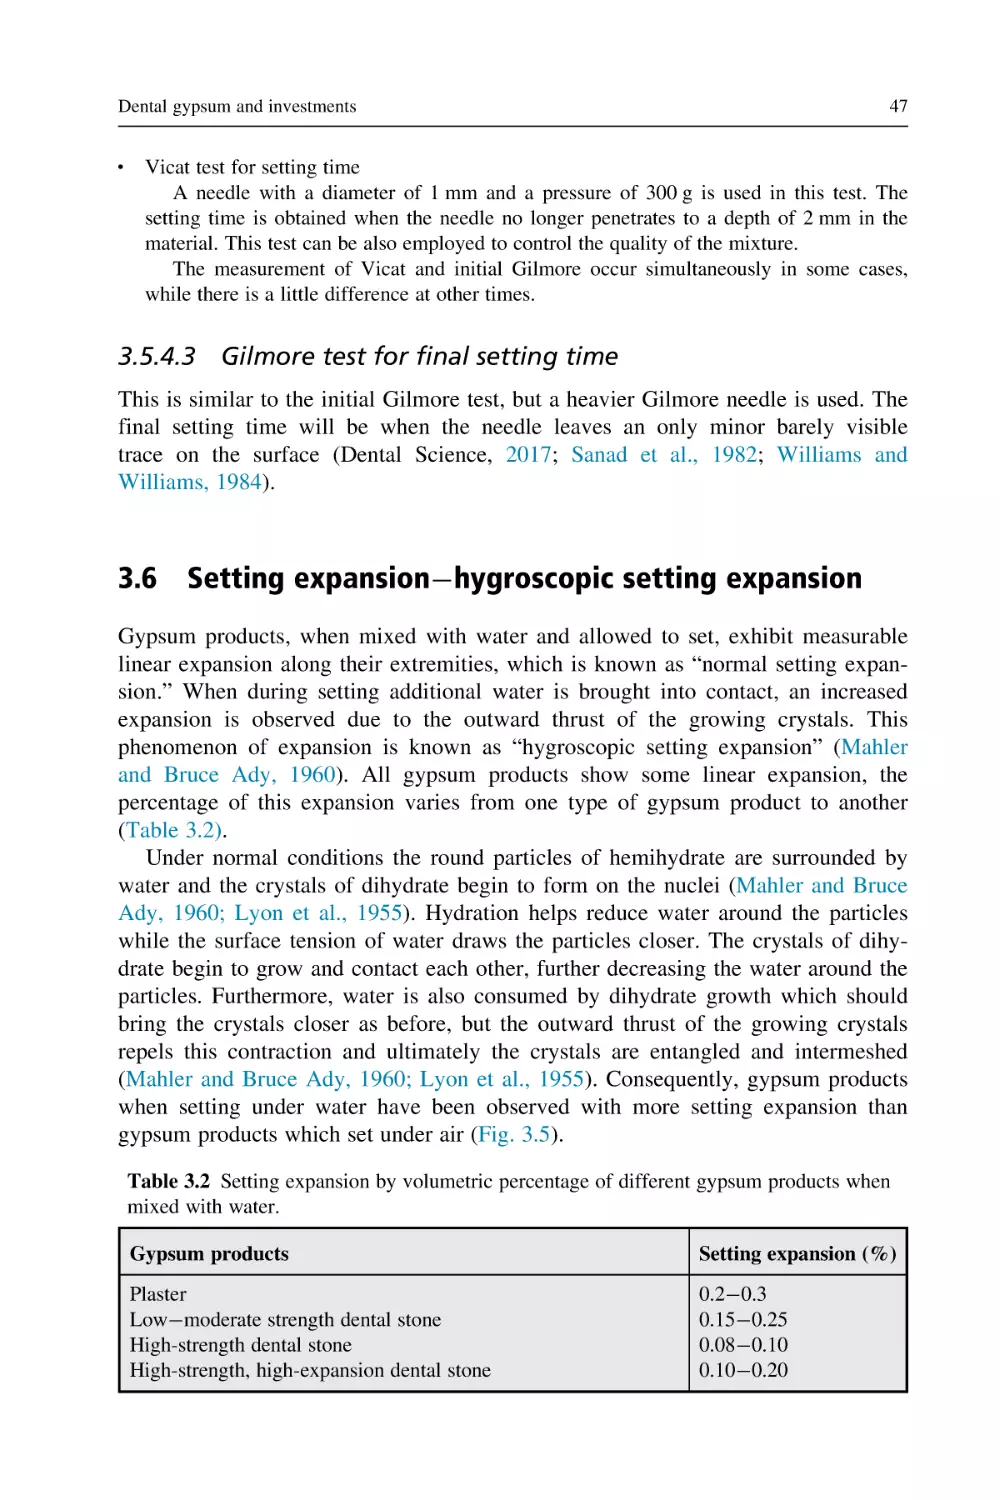 3.5.4.3 Gilmore test for final setting time
3.6 Setting expansion–hygroscopic setting expansion